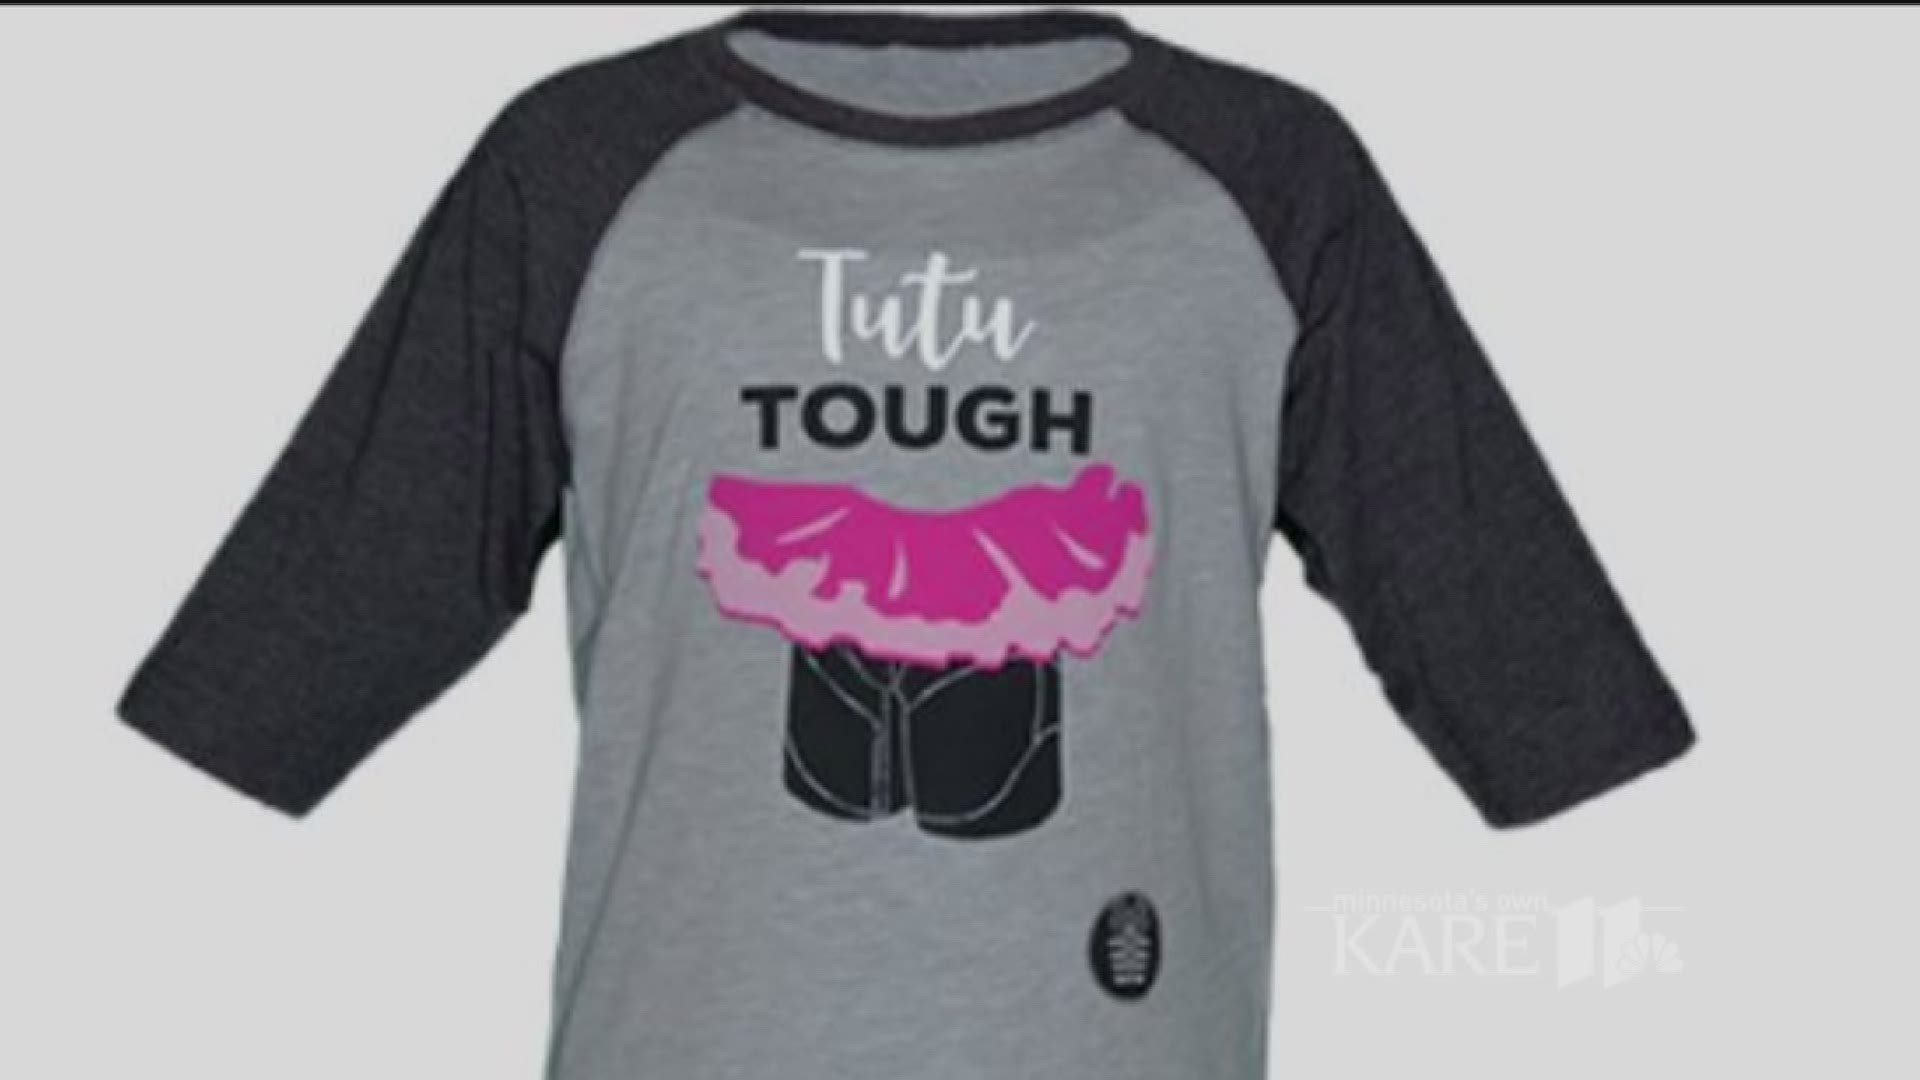 A hockey mom created a company aimed at cool hockey apparel for players and moms.